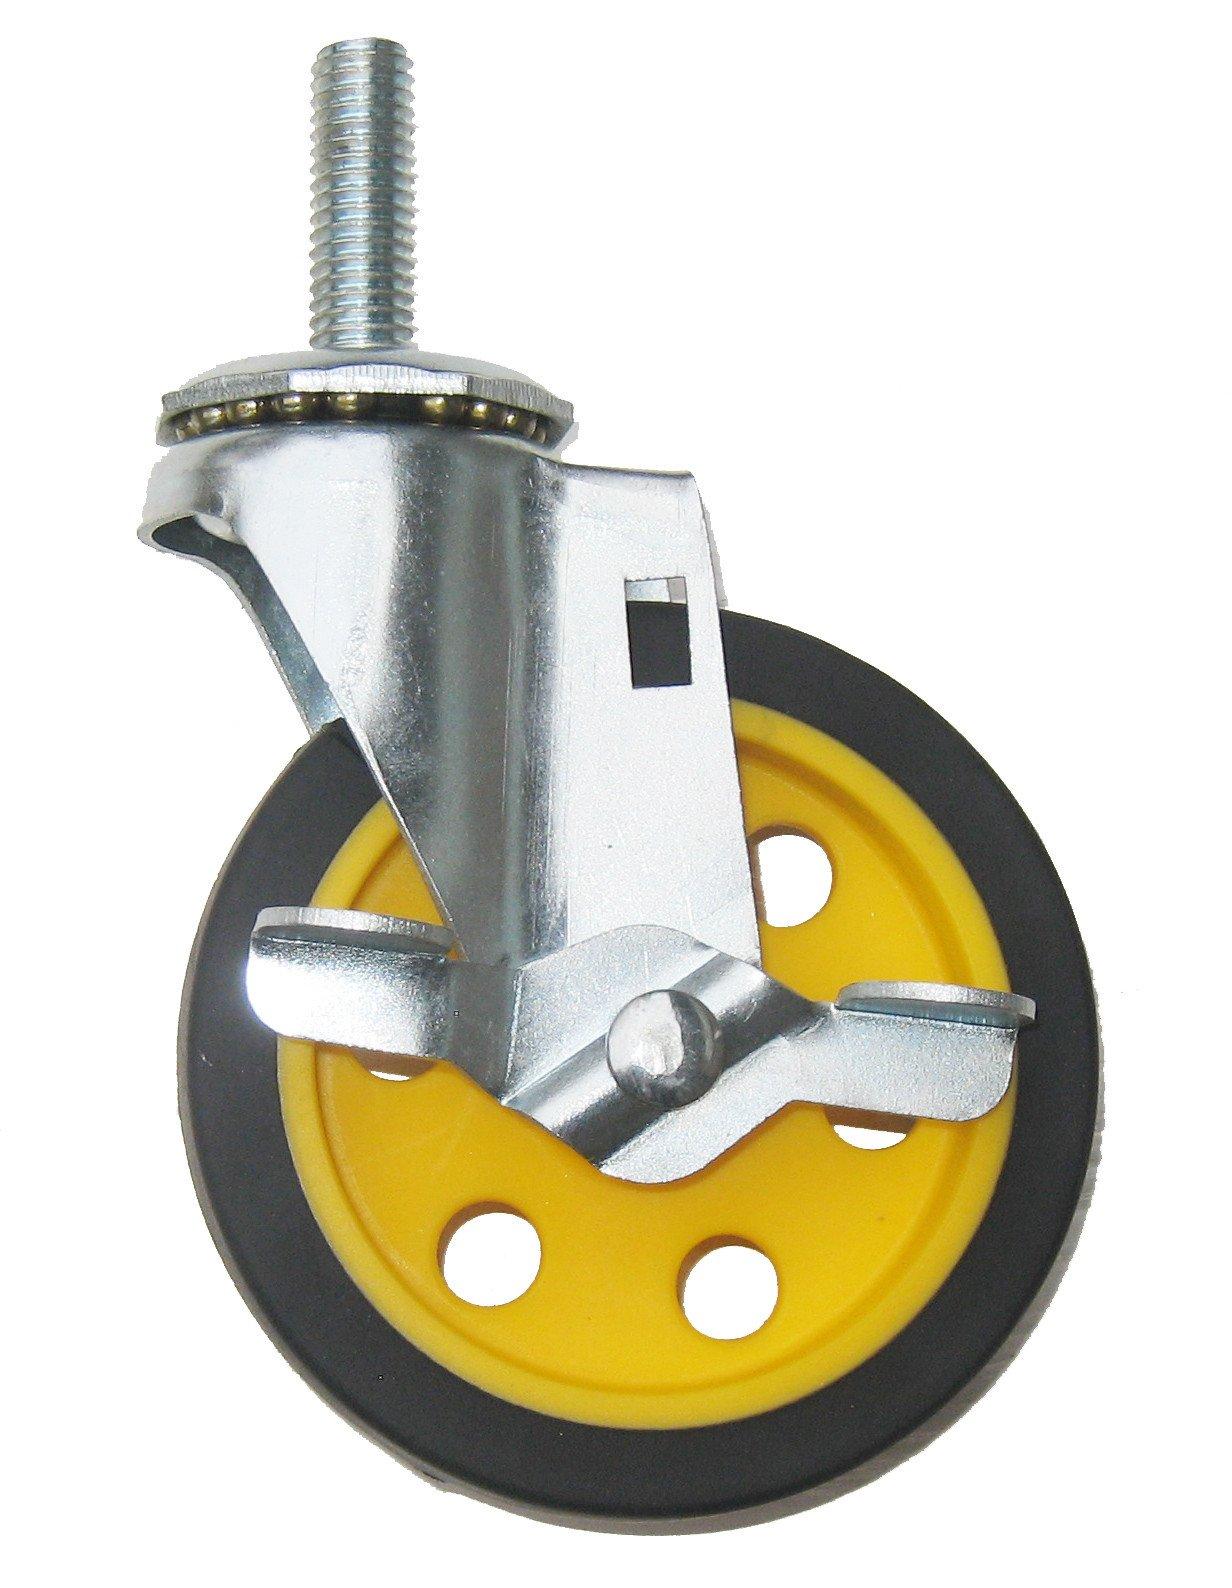 Caster with Brake 4"x1" (for R2 & R6)